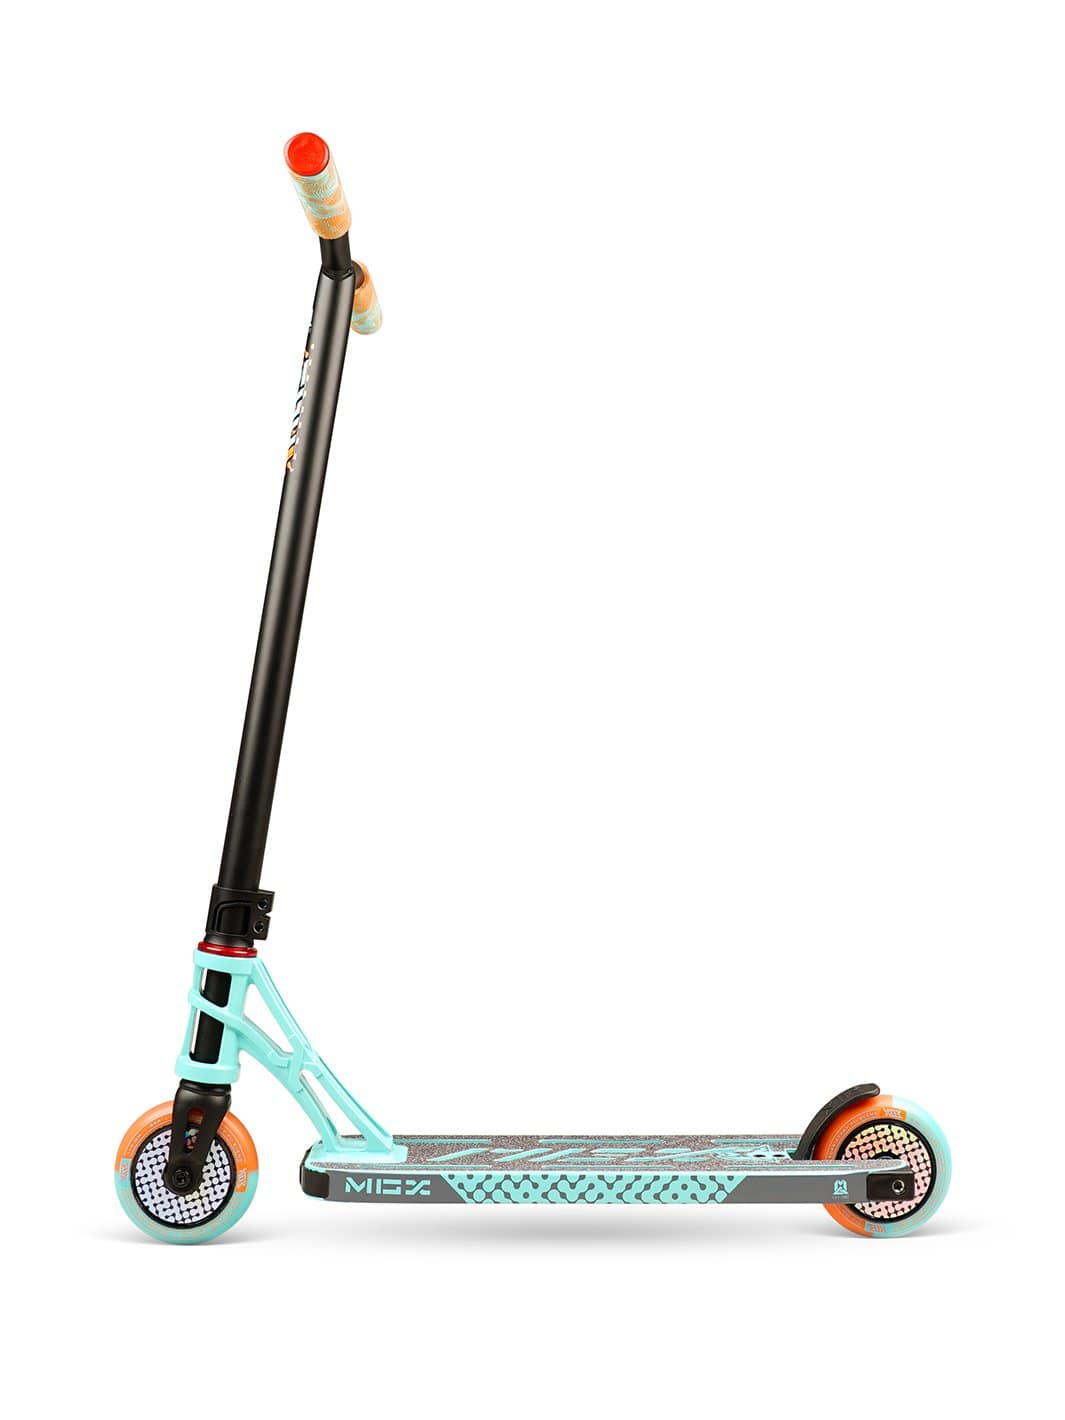 Madd Gear MGP MGX S1 Shredder Stunt Pro Scooter Complete High Quality Razor Trick Skate Park Mad Teal Orange Xit Hollow Core